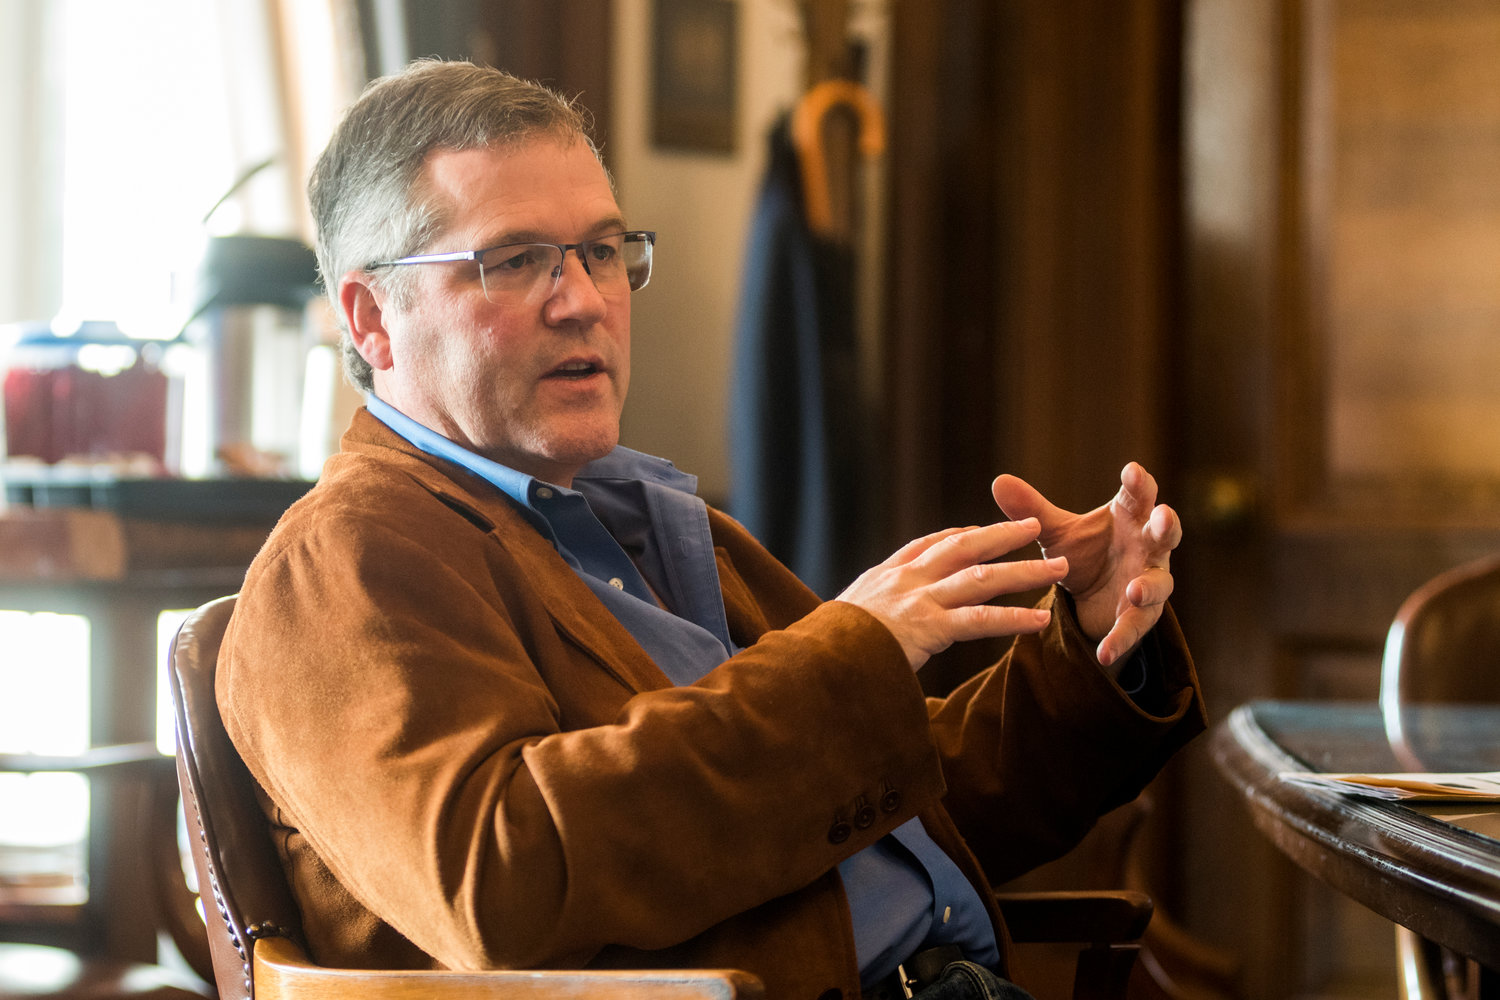 2019 FILE PHOTO — J.T. Wilcox talks during an interview inside his office at the State Capitol in Olympia.